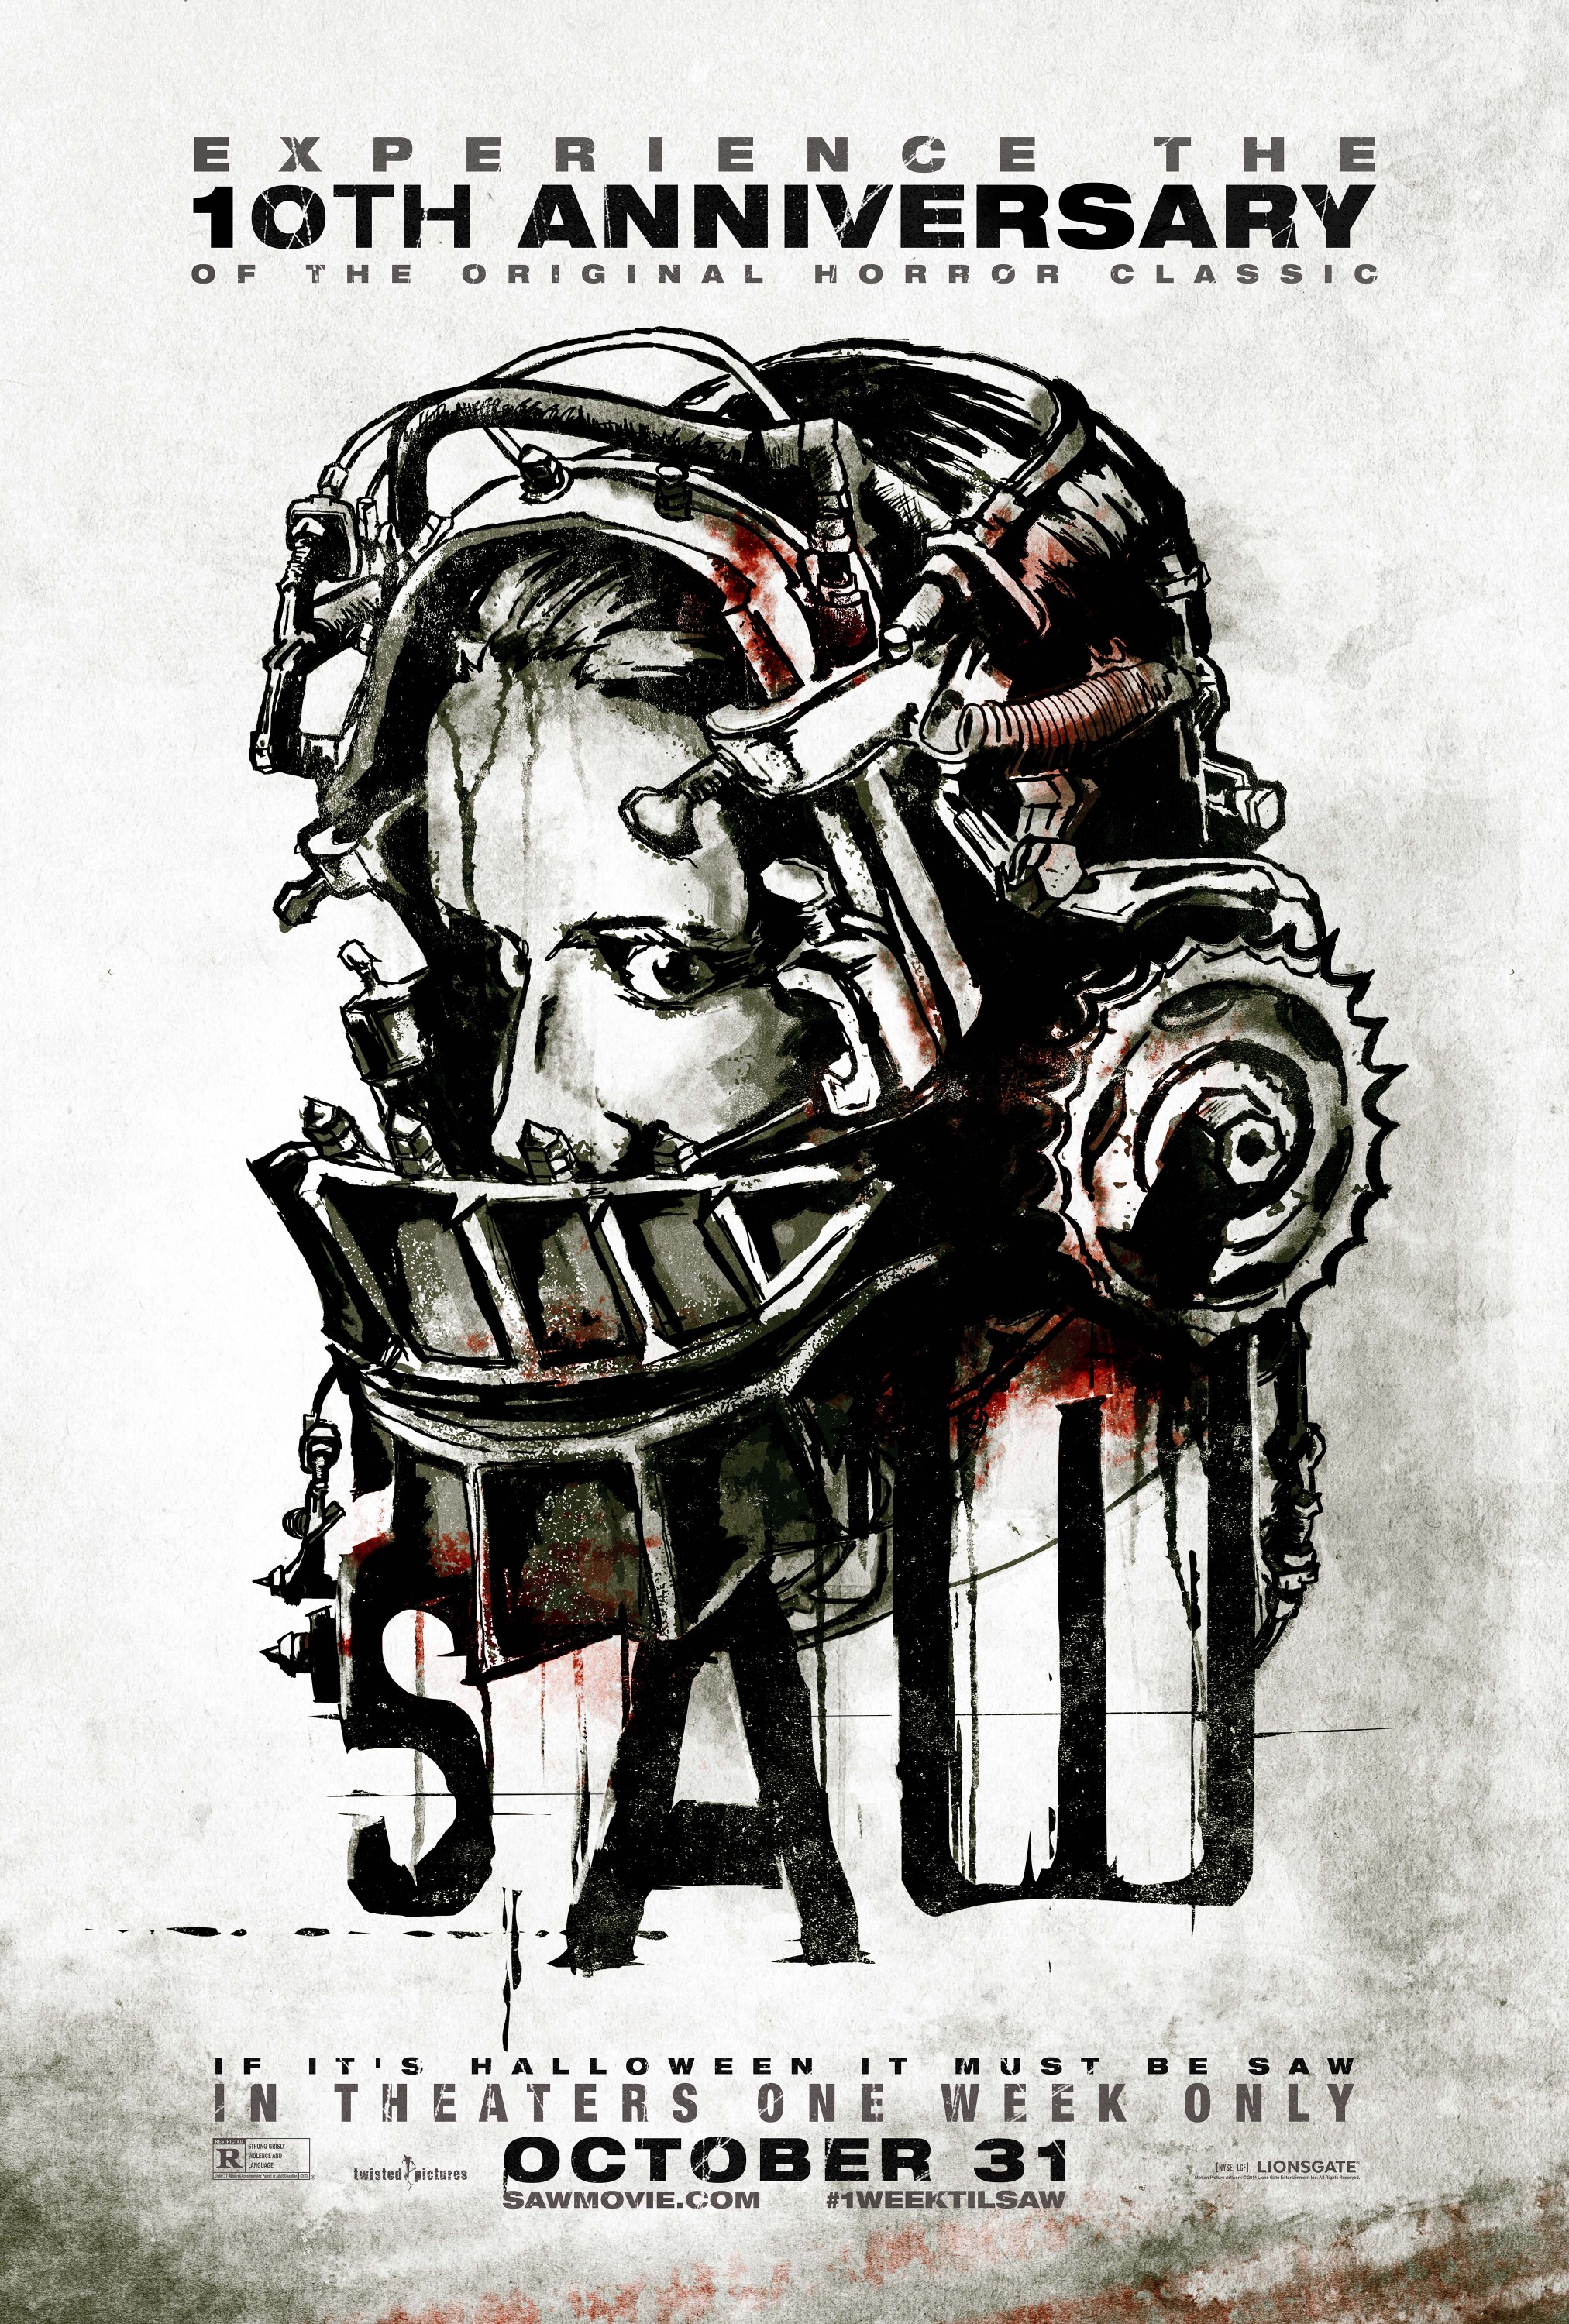 Mega Sized Movie Poster Image for Saw (#13 of 14)